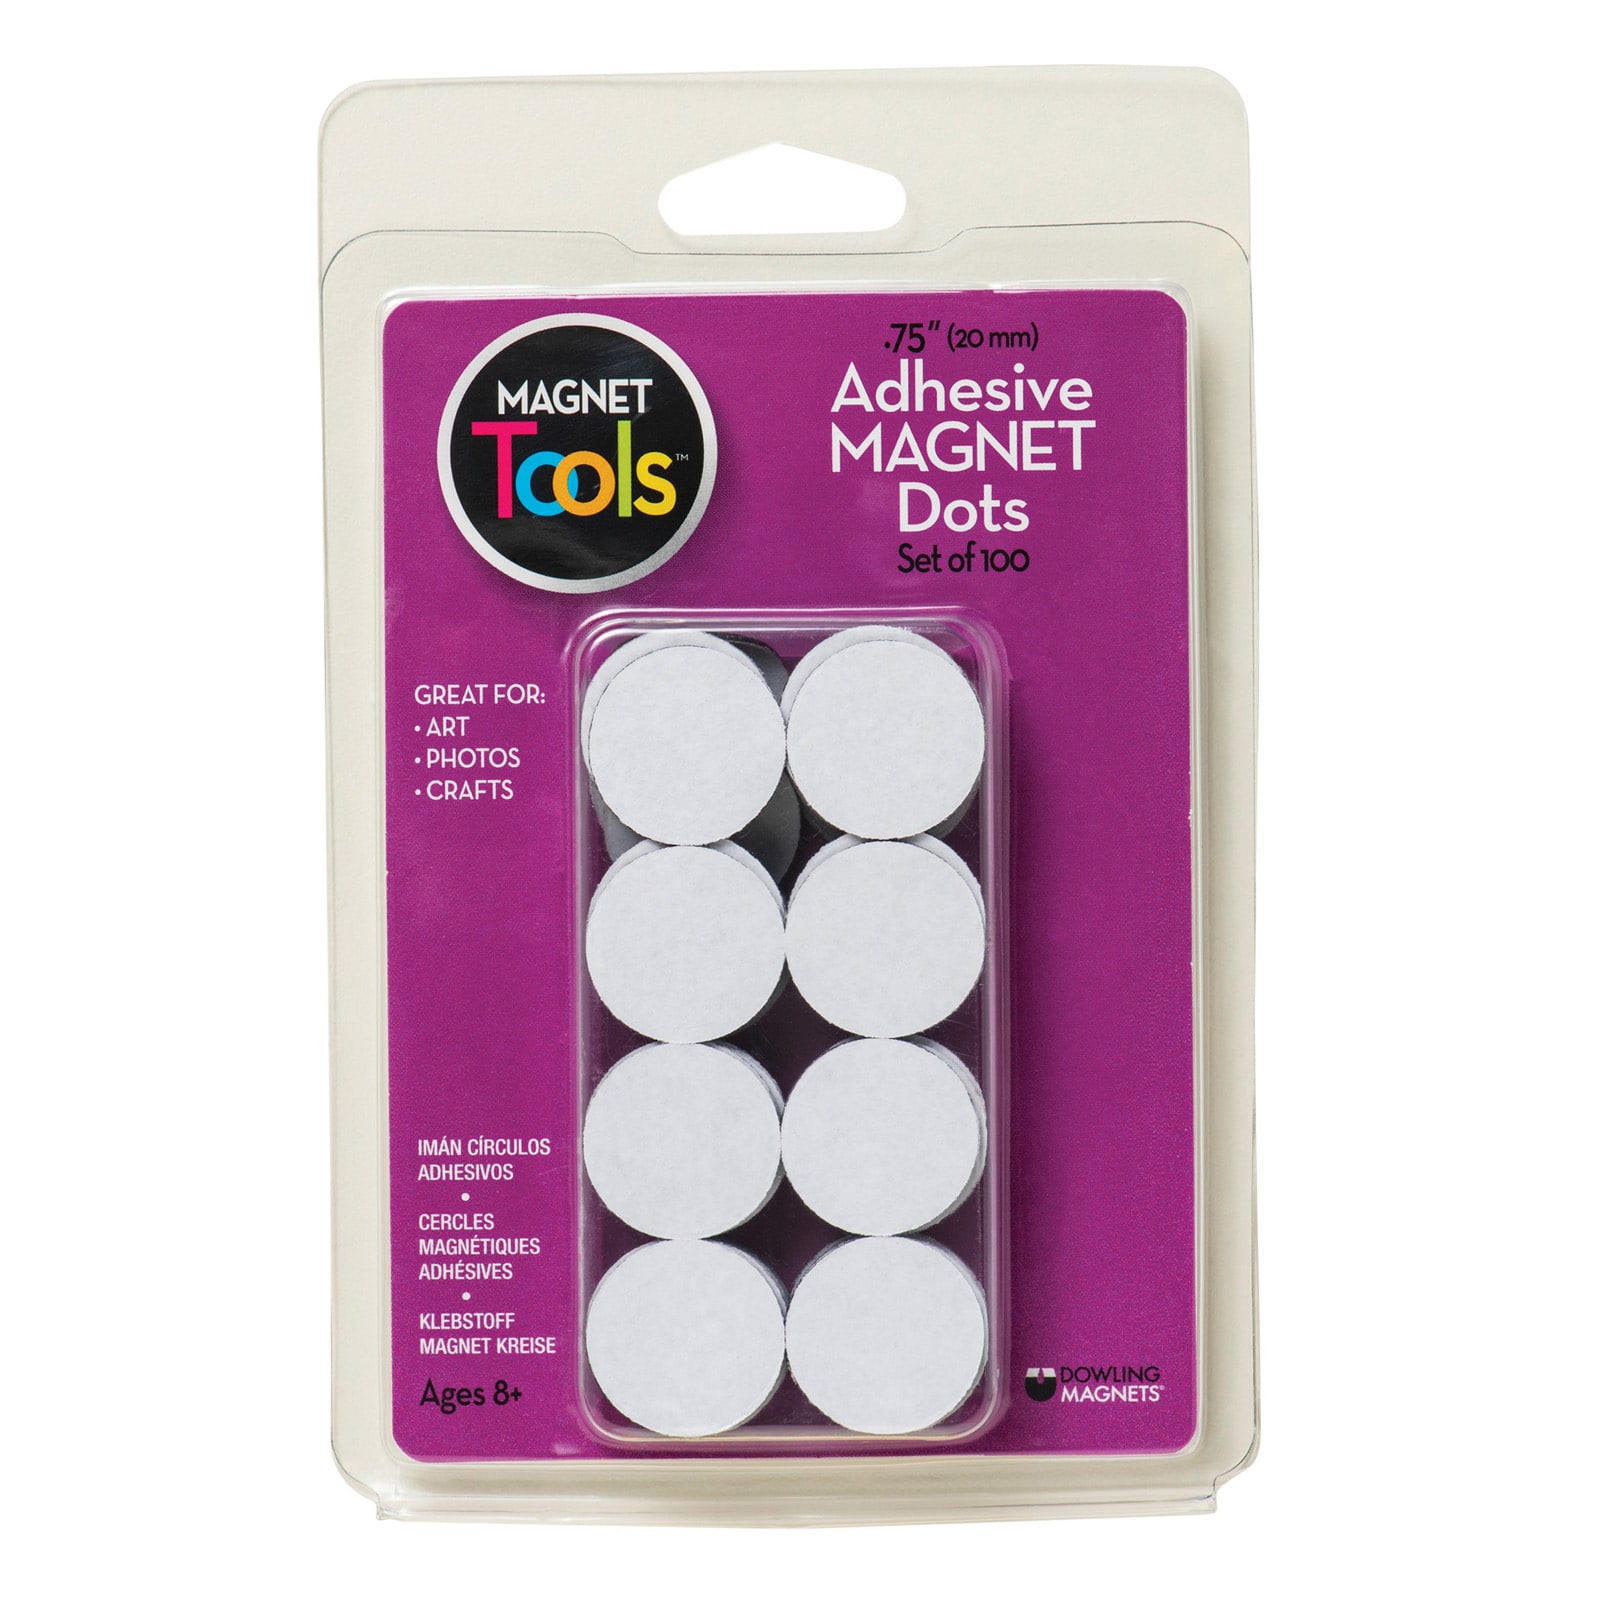 24 Packs: 100 ct. (2,400 total) Magnet Dots With Adhesive